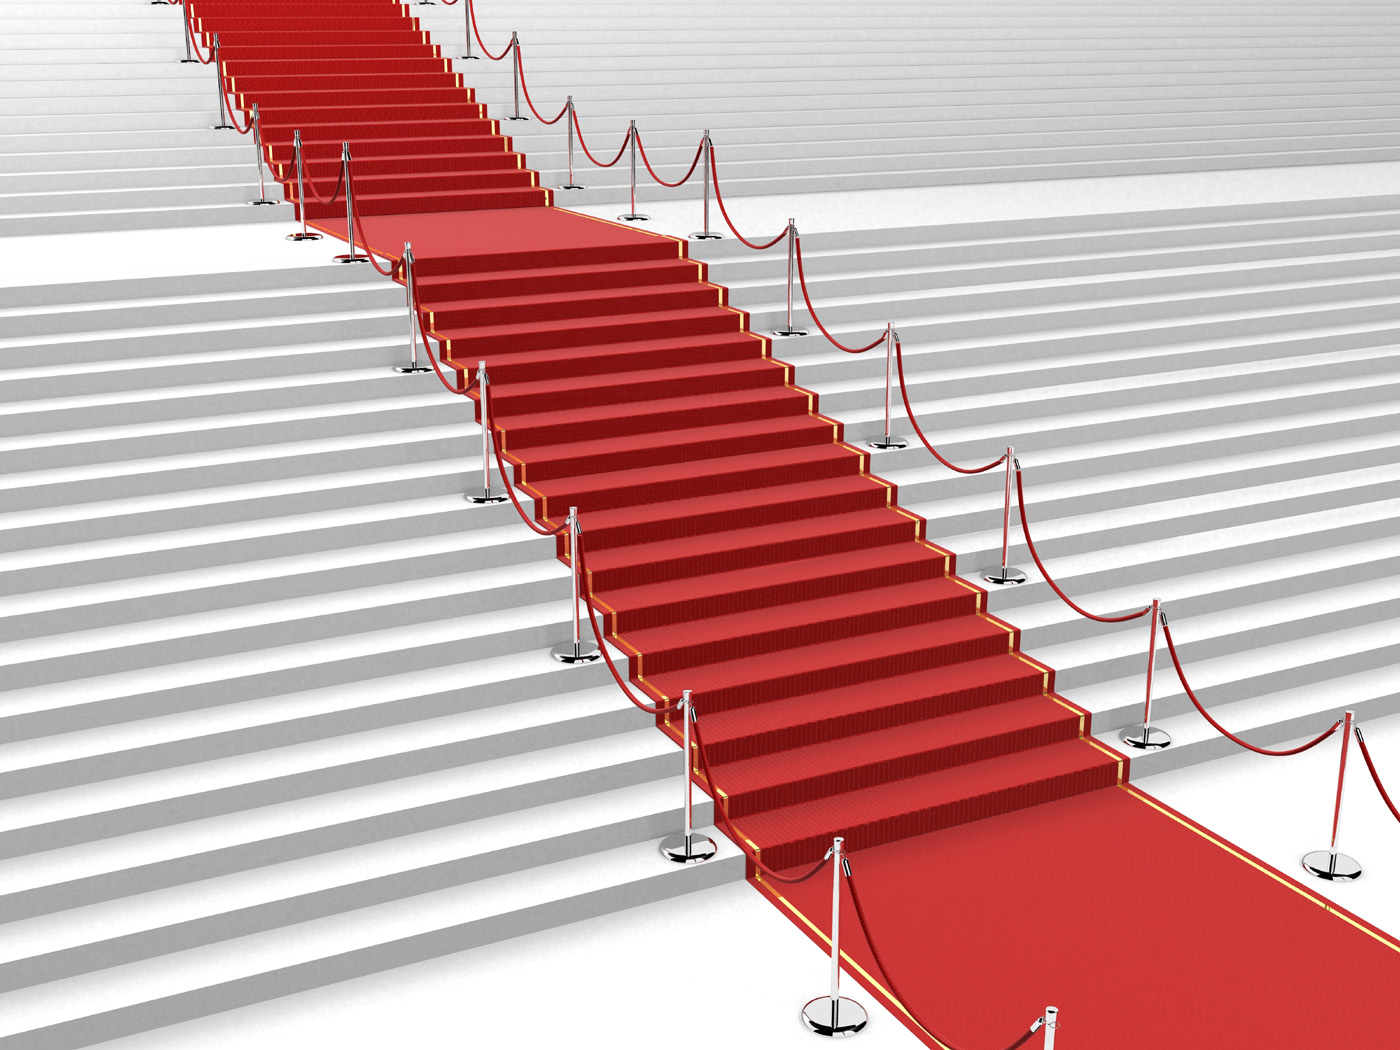 Guardrail and stairs covered with red carpet 50019 - Stage venue ...